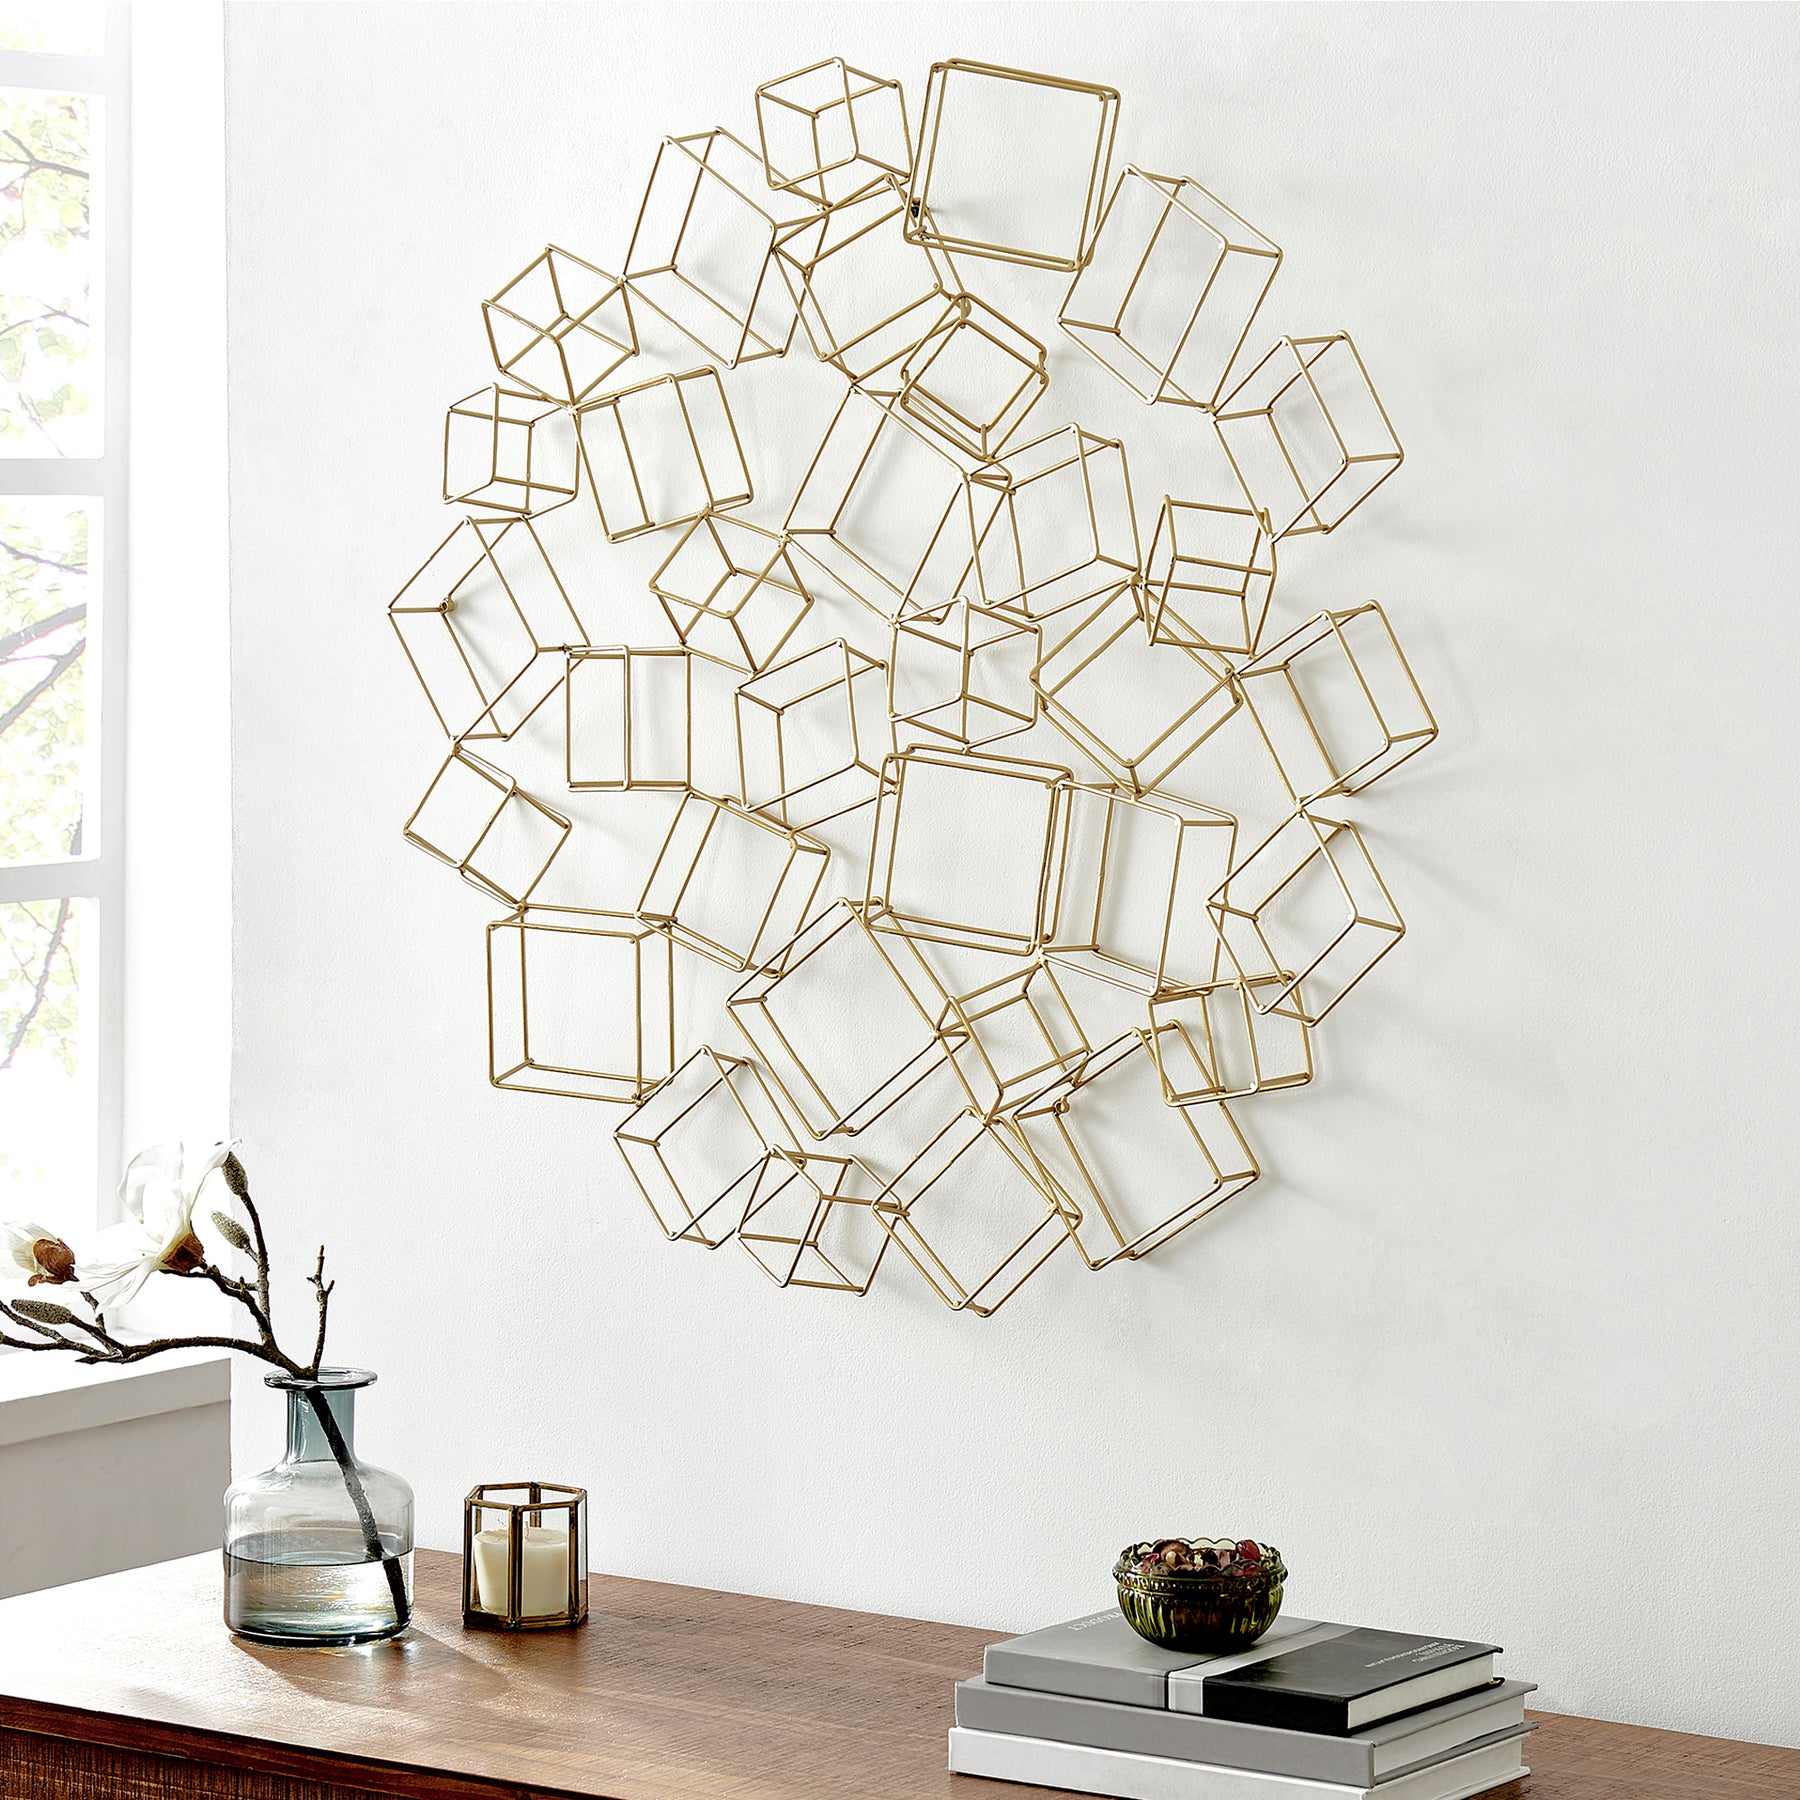 FirsTime & Co. Gold Giselle Cubes Wall Decor, Modern, Metal, 31.5 x 4.25 x  31.5 inches